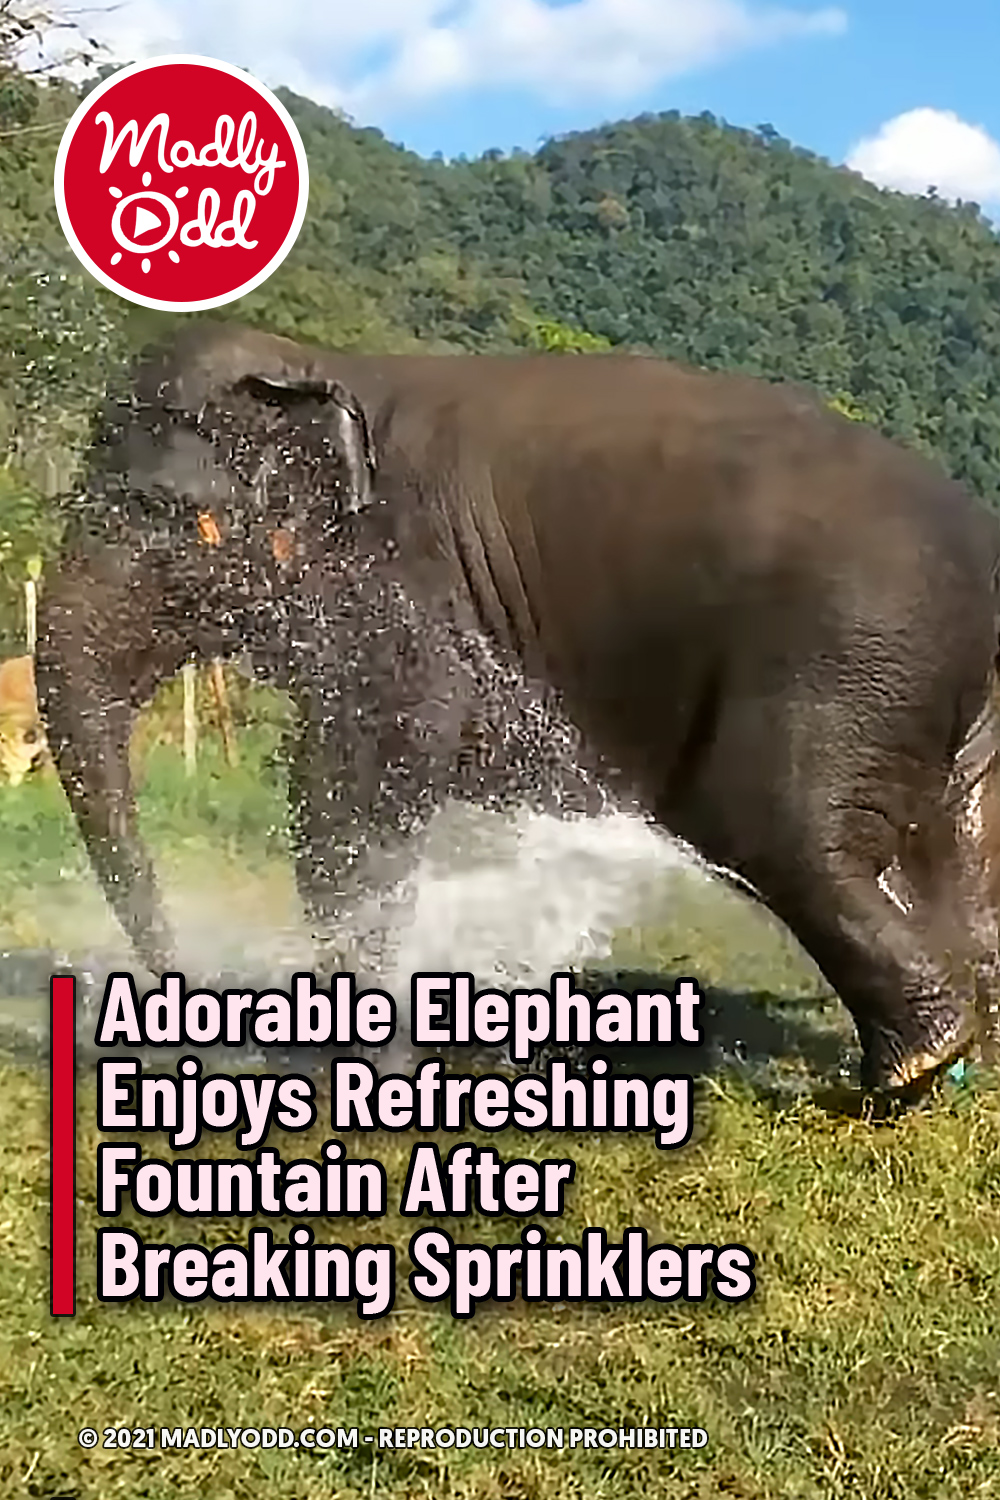 Adorable Elephant Enjoys Refreshing Fountain After Breaking Sprinklers